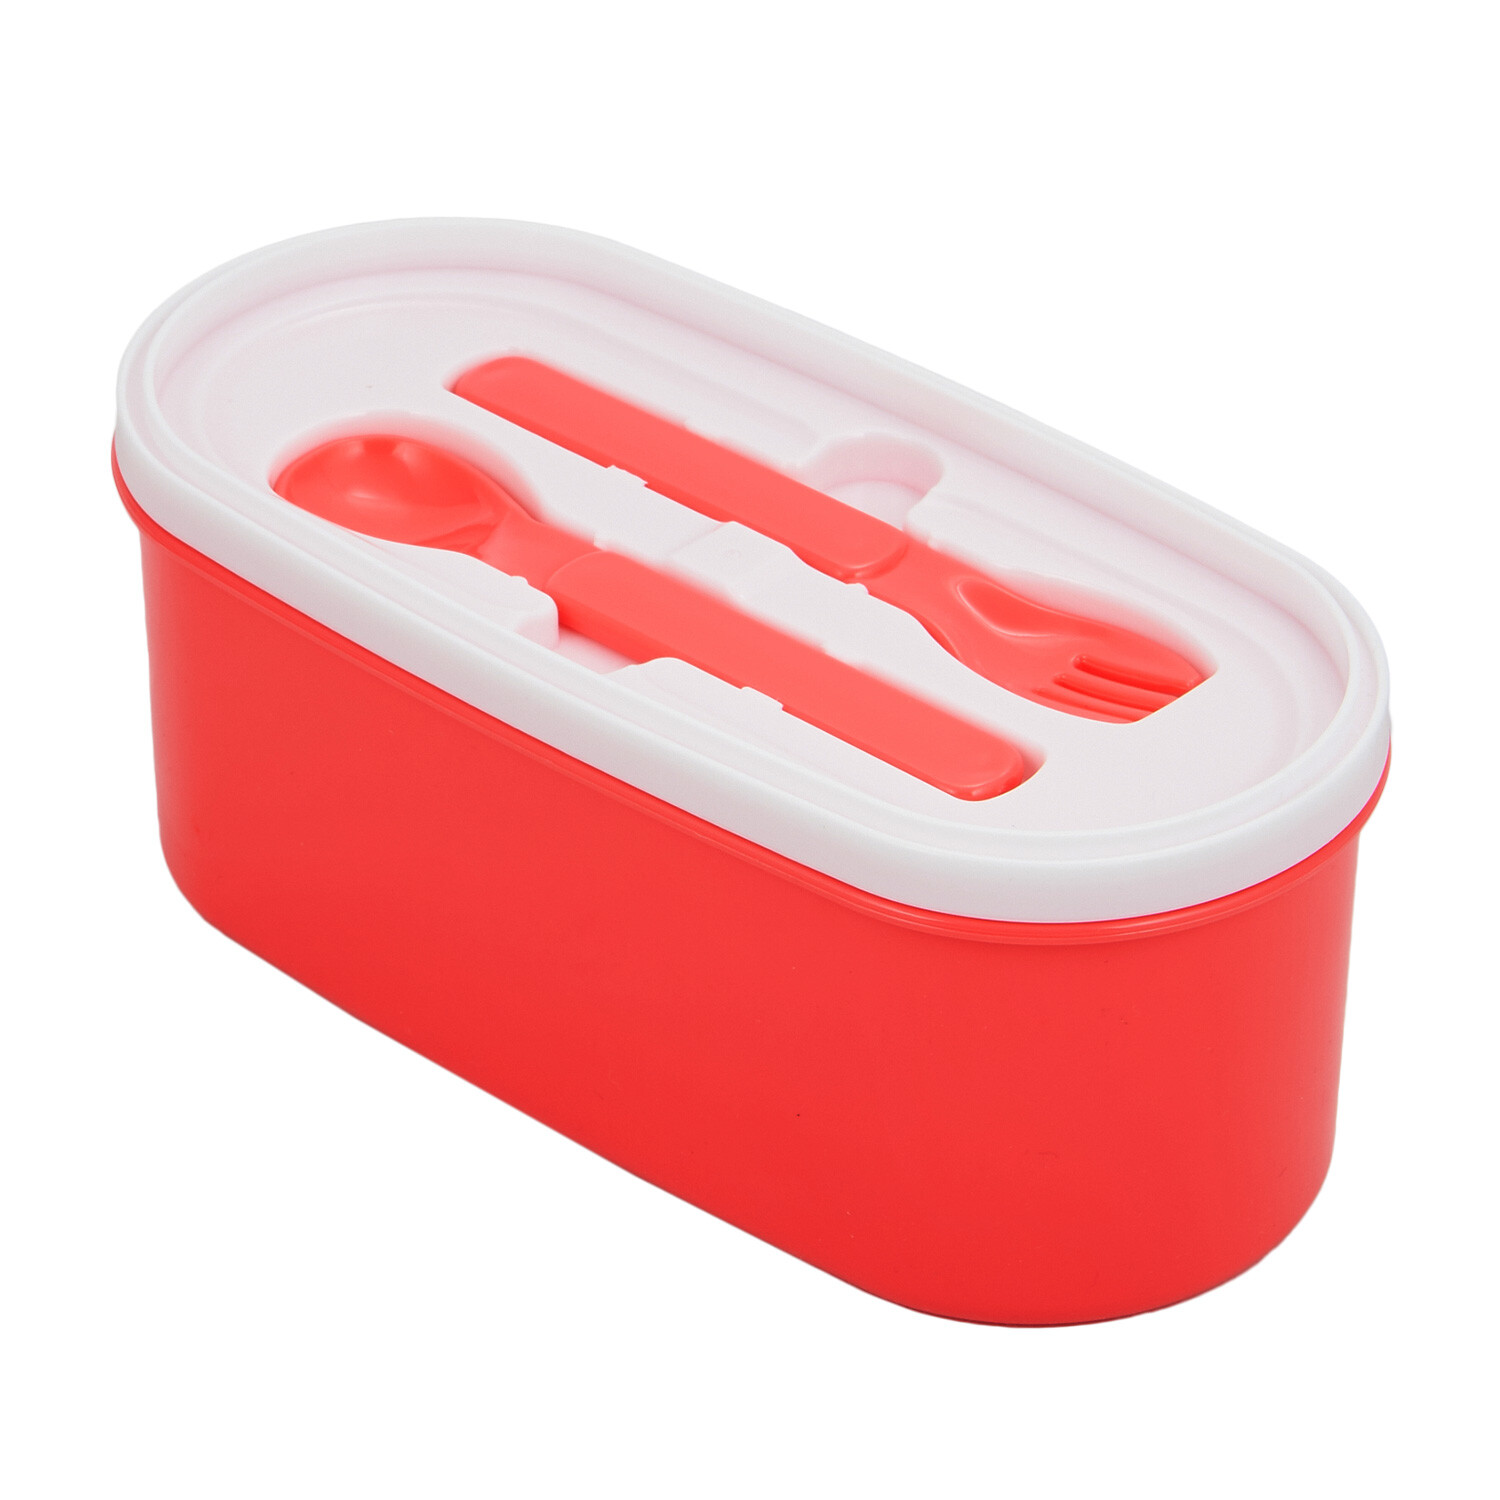 Triple Compartment Lunch Box - Red Image 5